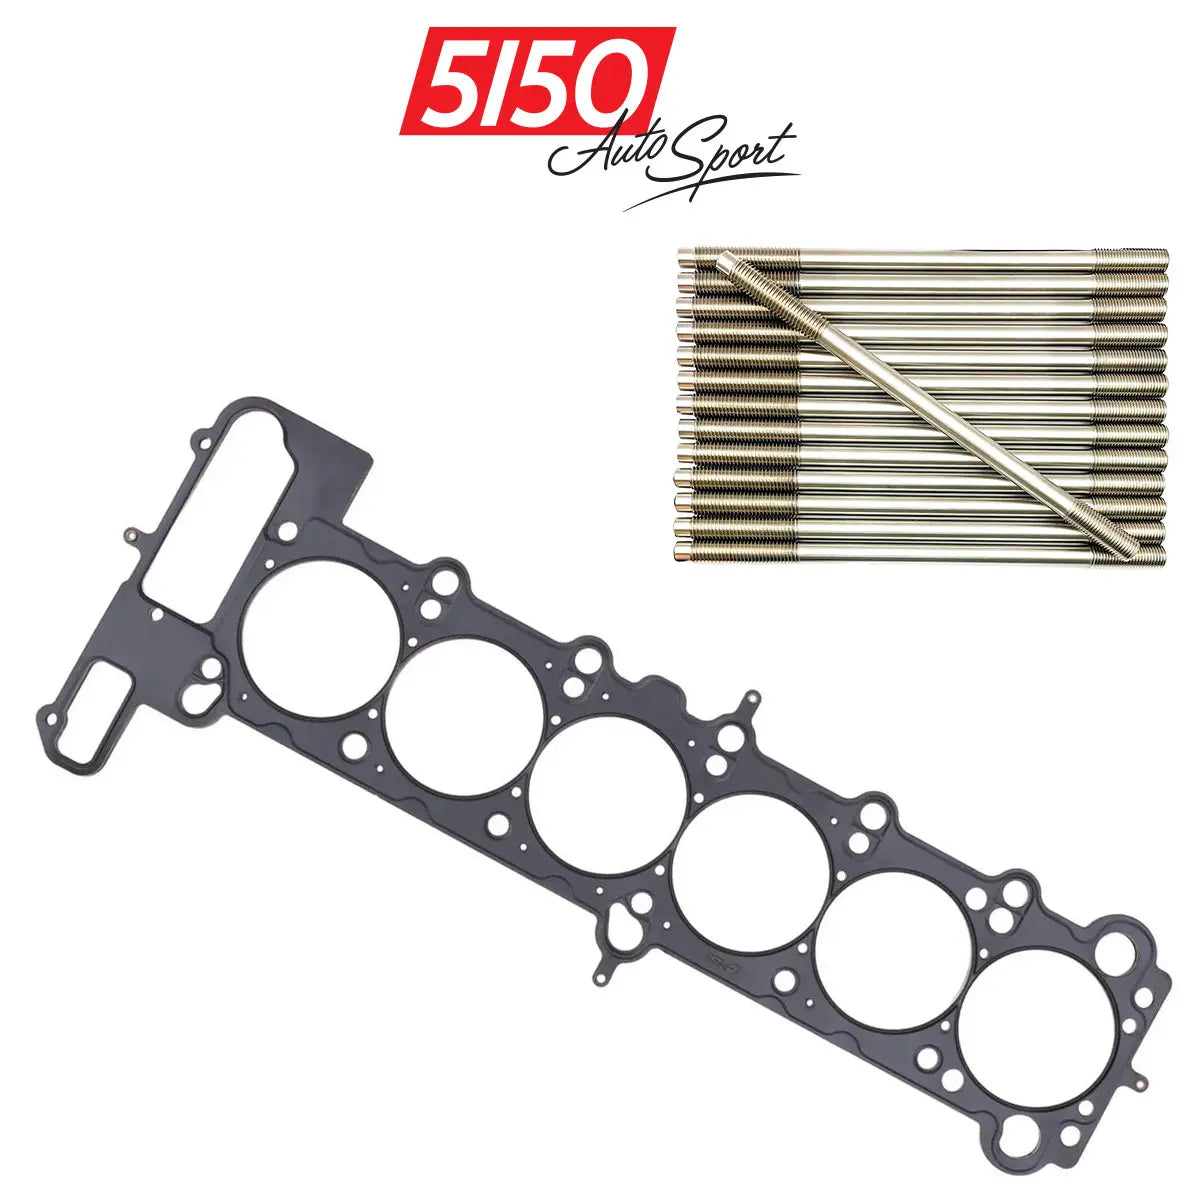 Cometic Multi-Layered Steel Head Gasket for E36 Engines ARP 625+ Head Stud Kit for M50 M52 S50 S52